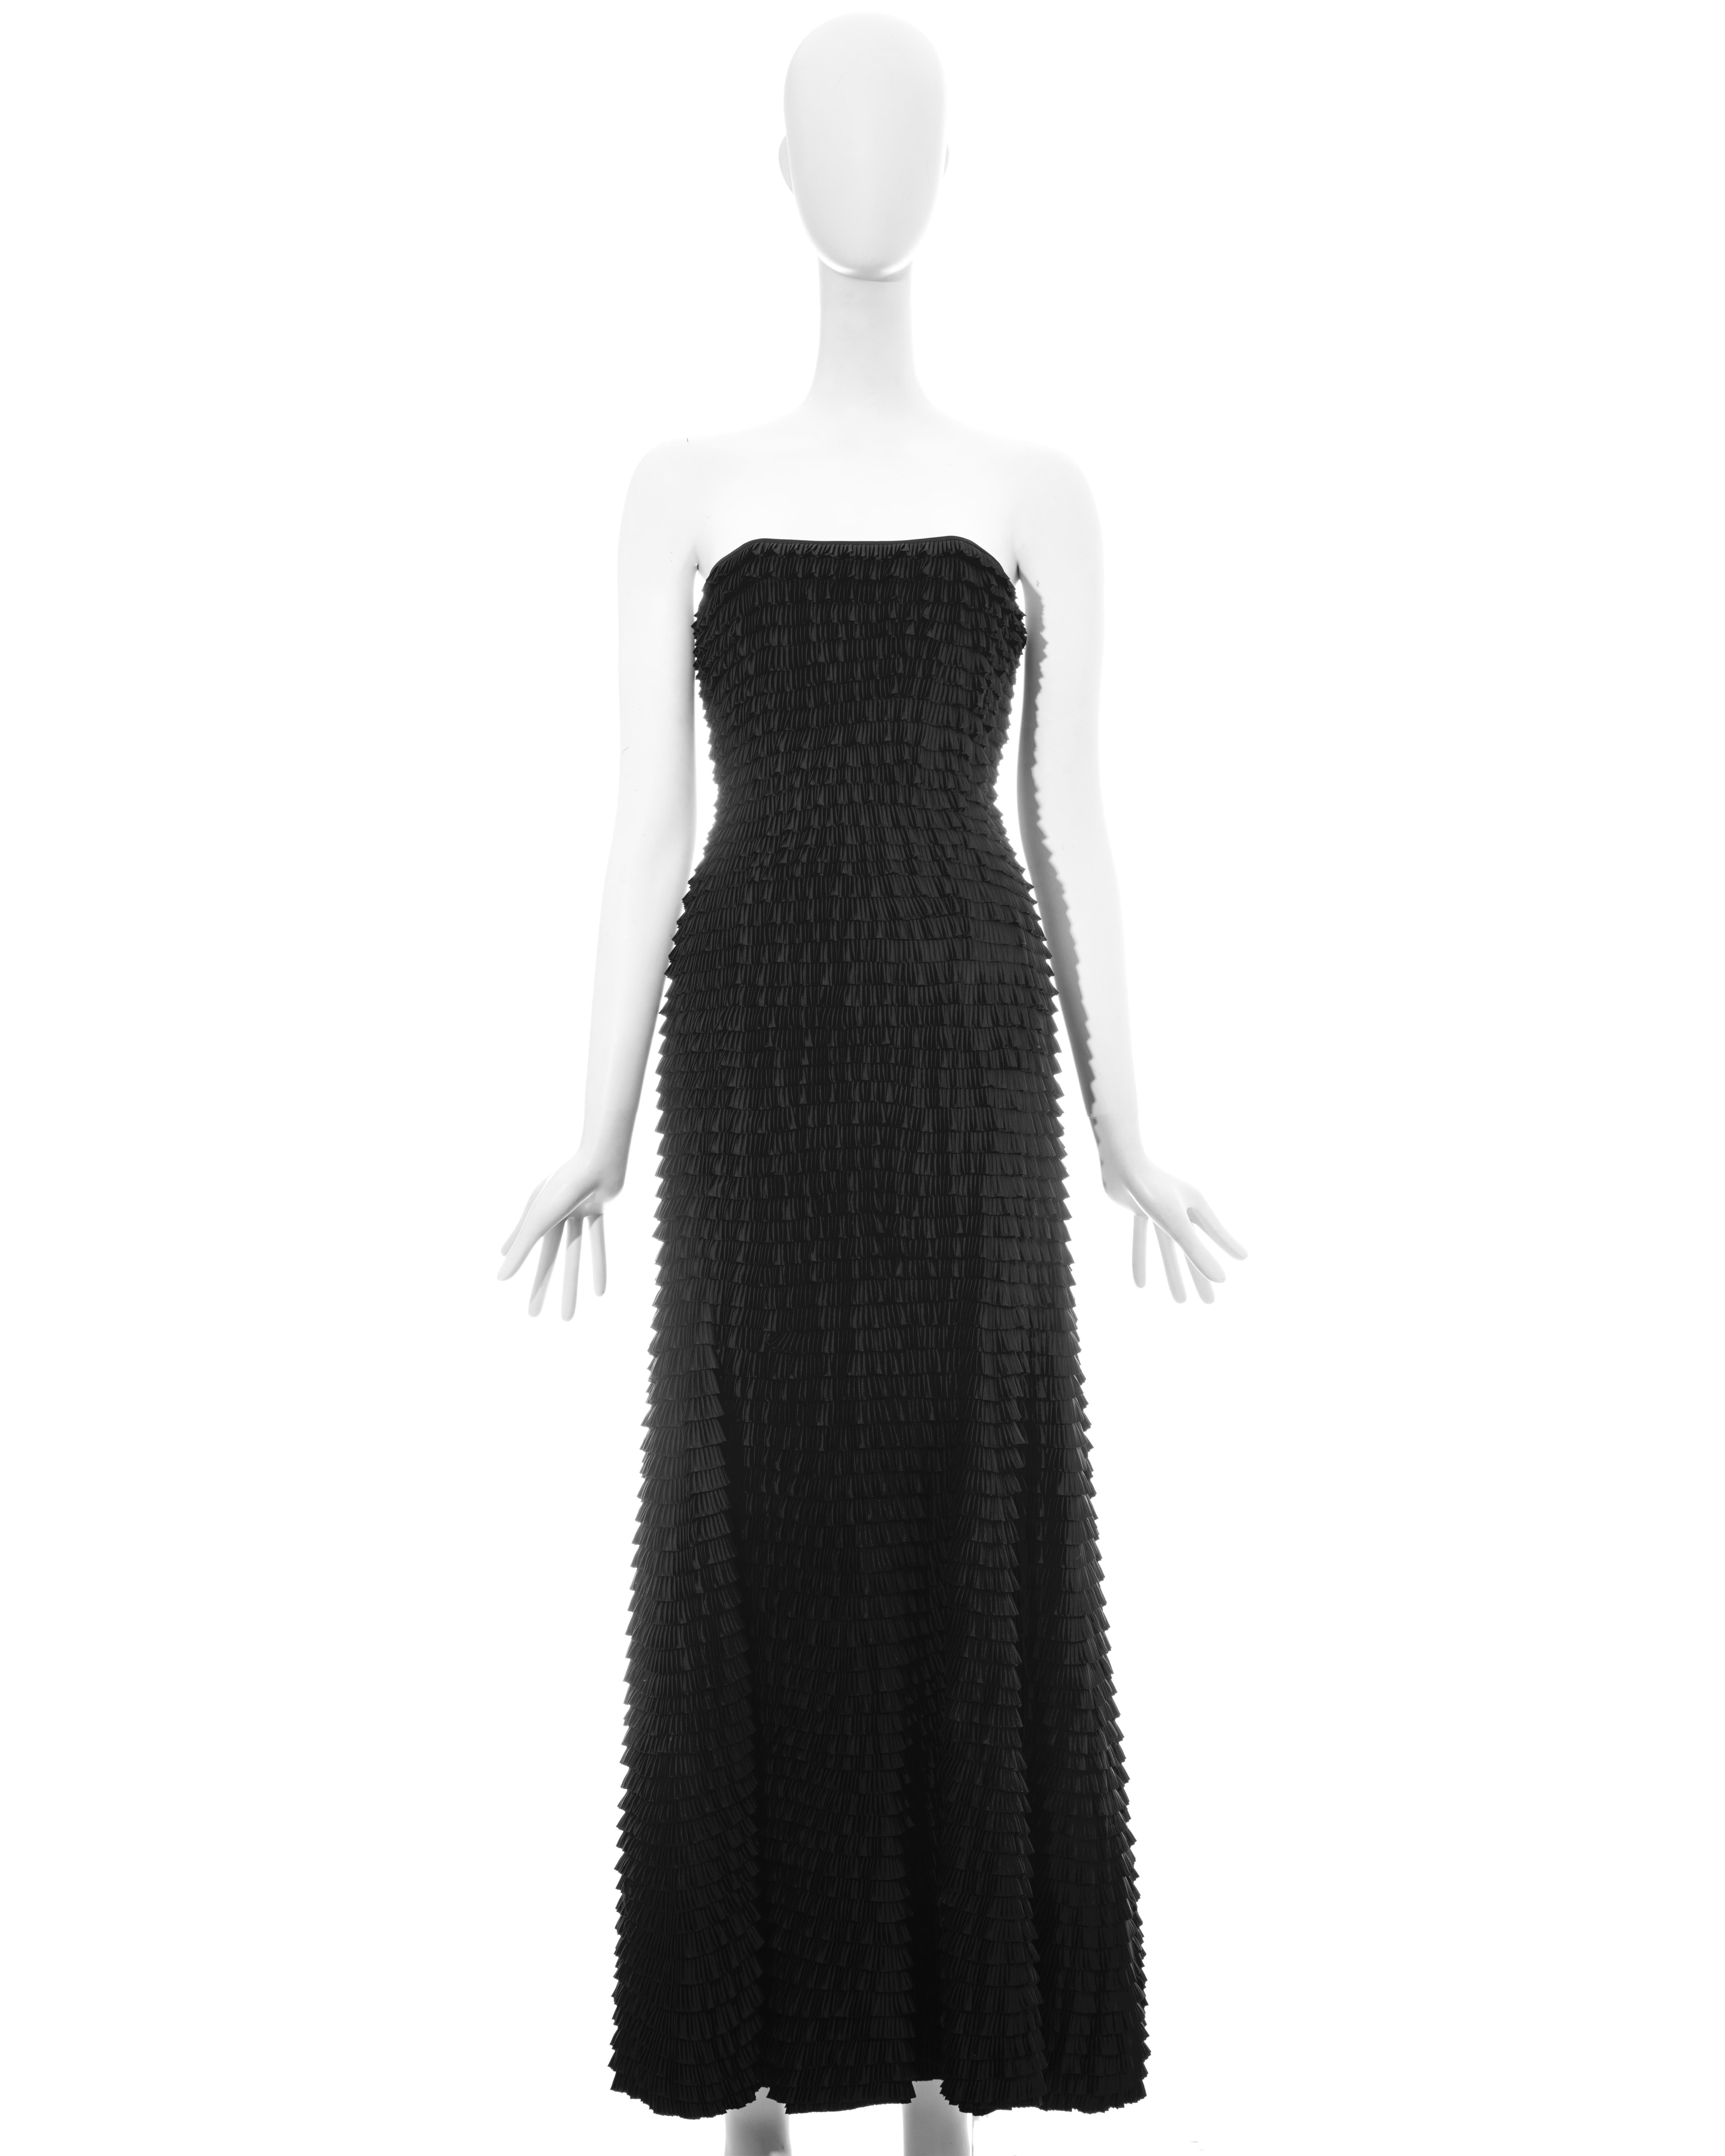 Givenchy by Alexander McQueen black ruffled fishtail strapless evening dress with built-in corset. 

Spring-Summer 1999